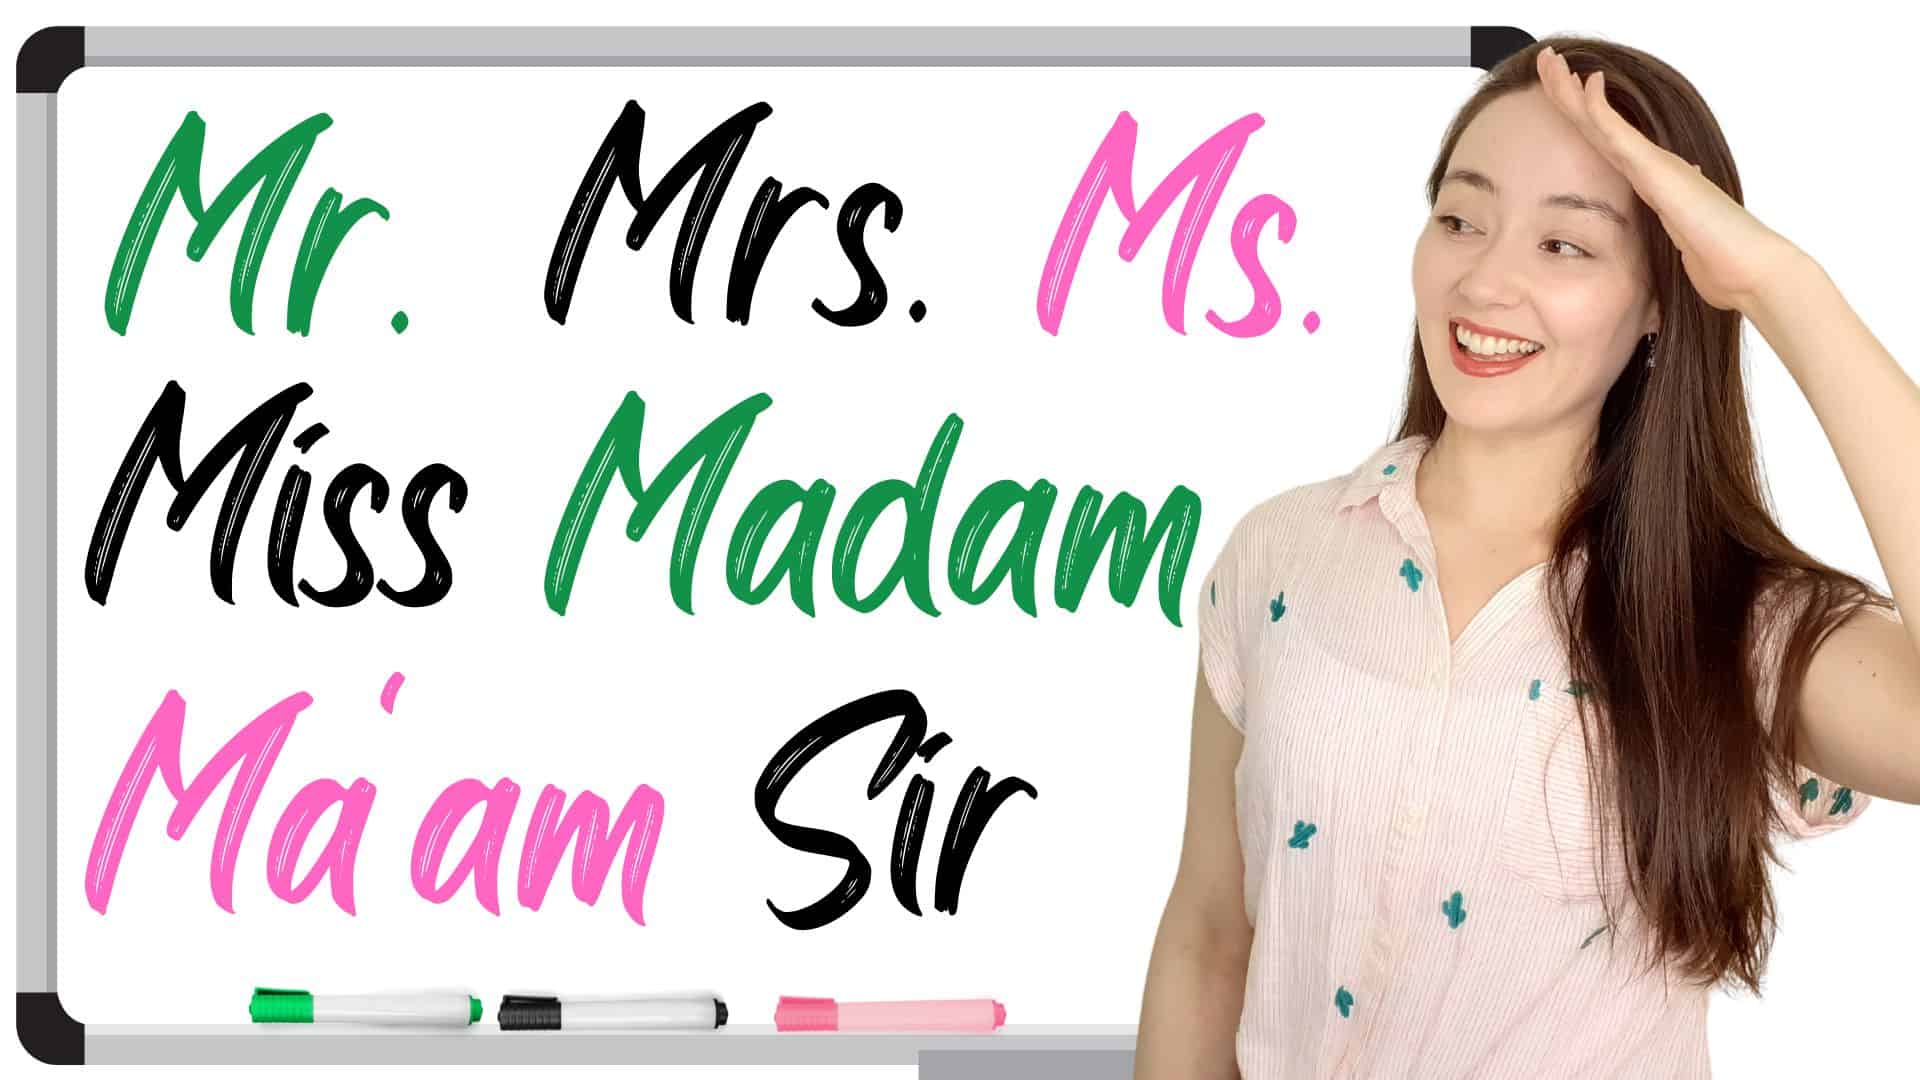 Miss, Mrs., Ms., Madam, Mr are all titles. 